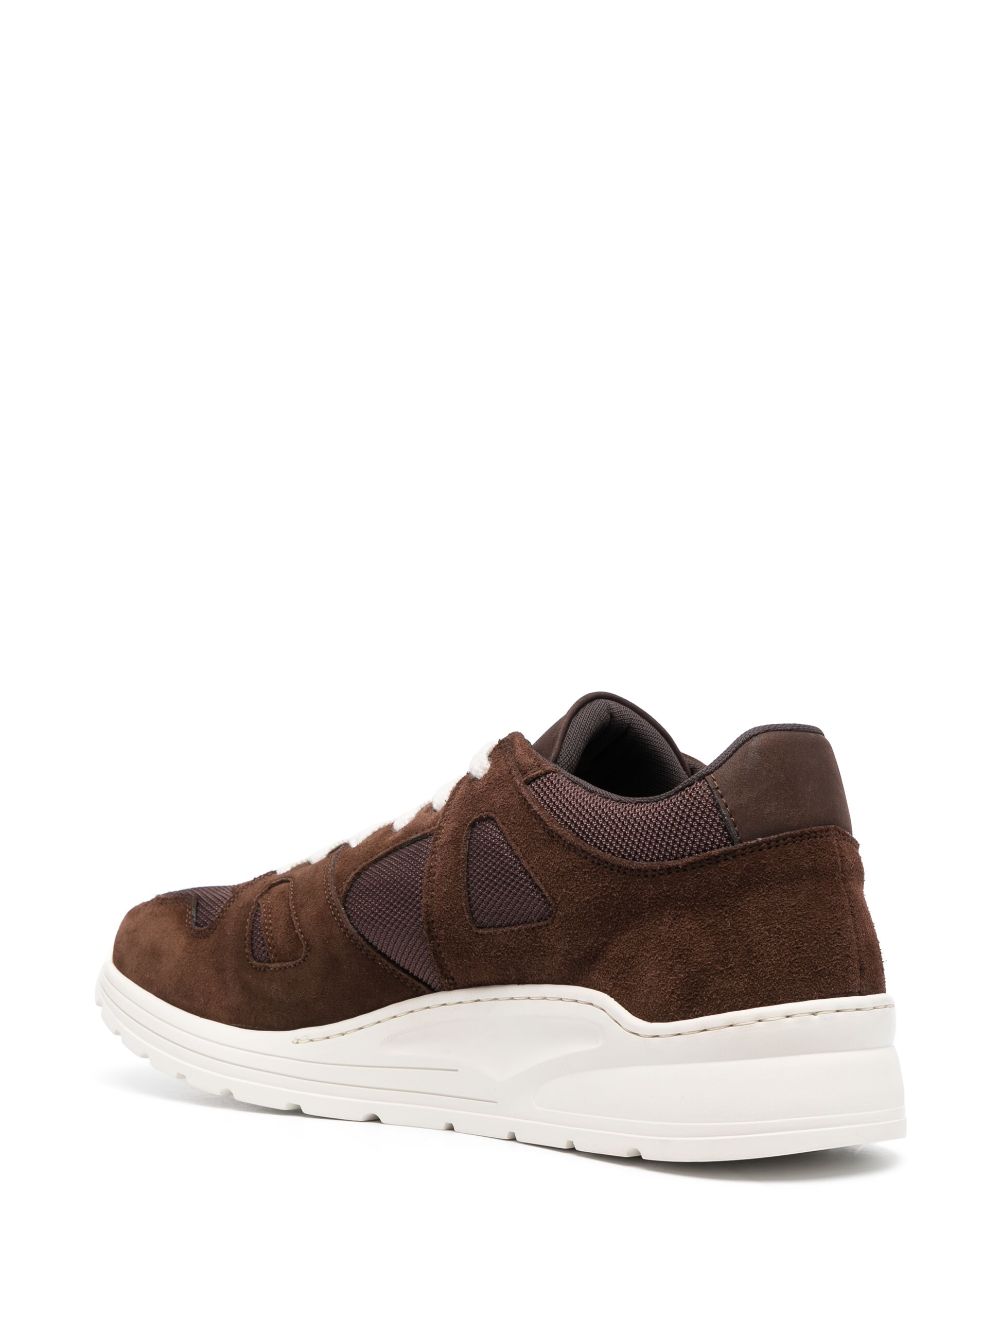 Common Projects Cross Trainer Panelled Sneakers - Farfetch